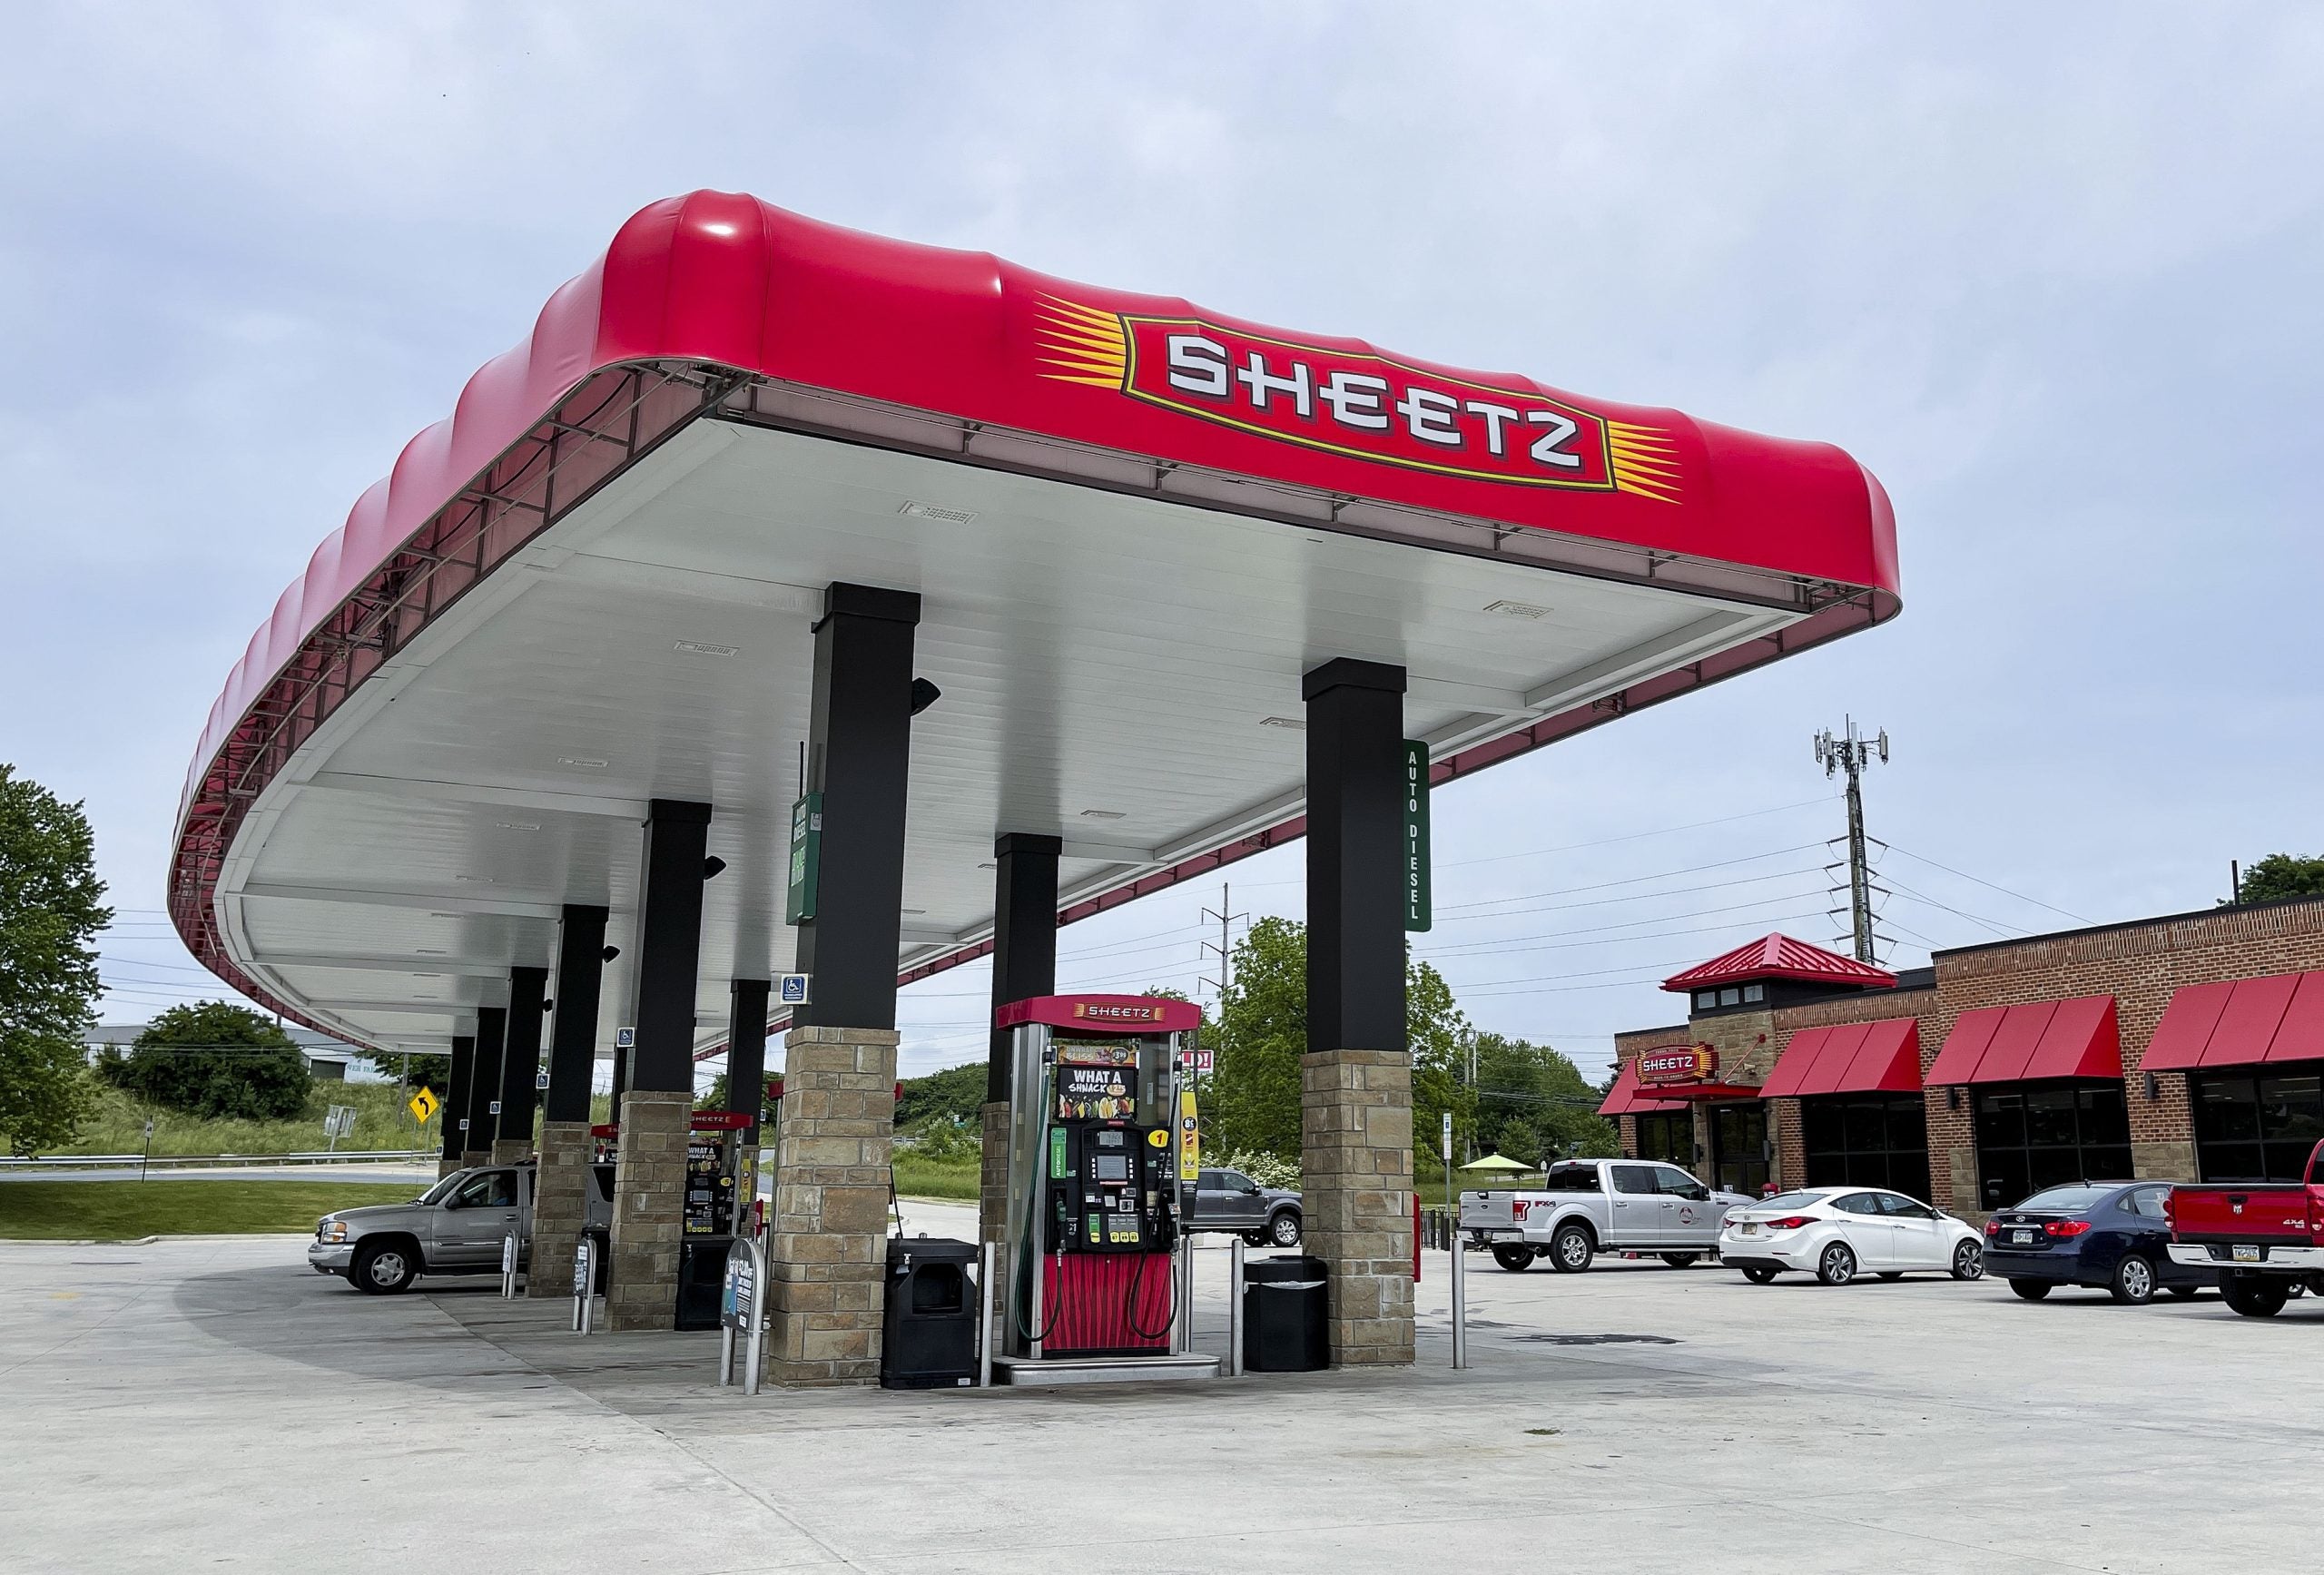 EEOC Takes Legal Against Sheetz Over Alleged Racial Discriminatory Hiring Practices